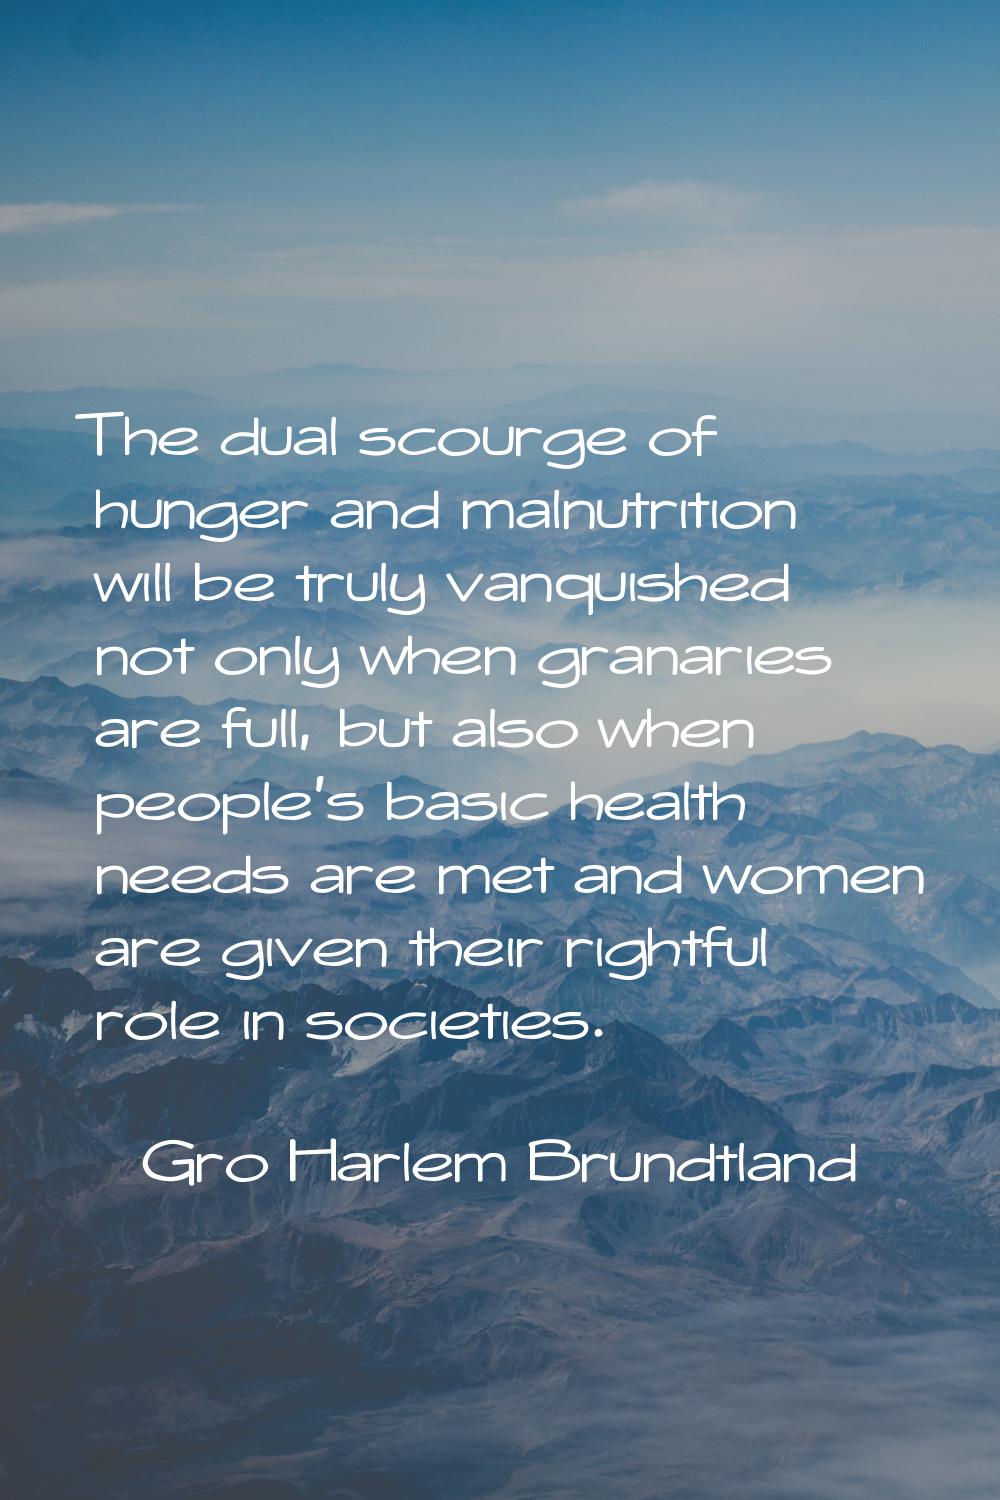 The dual scourge of hunger and malnutrition will be truly vanquished not only when granaries are fu